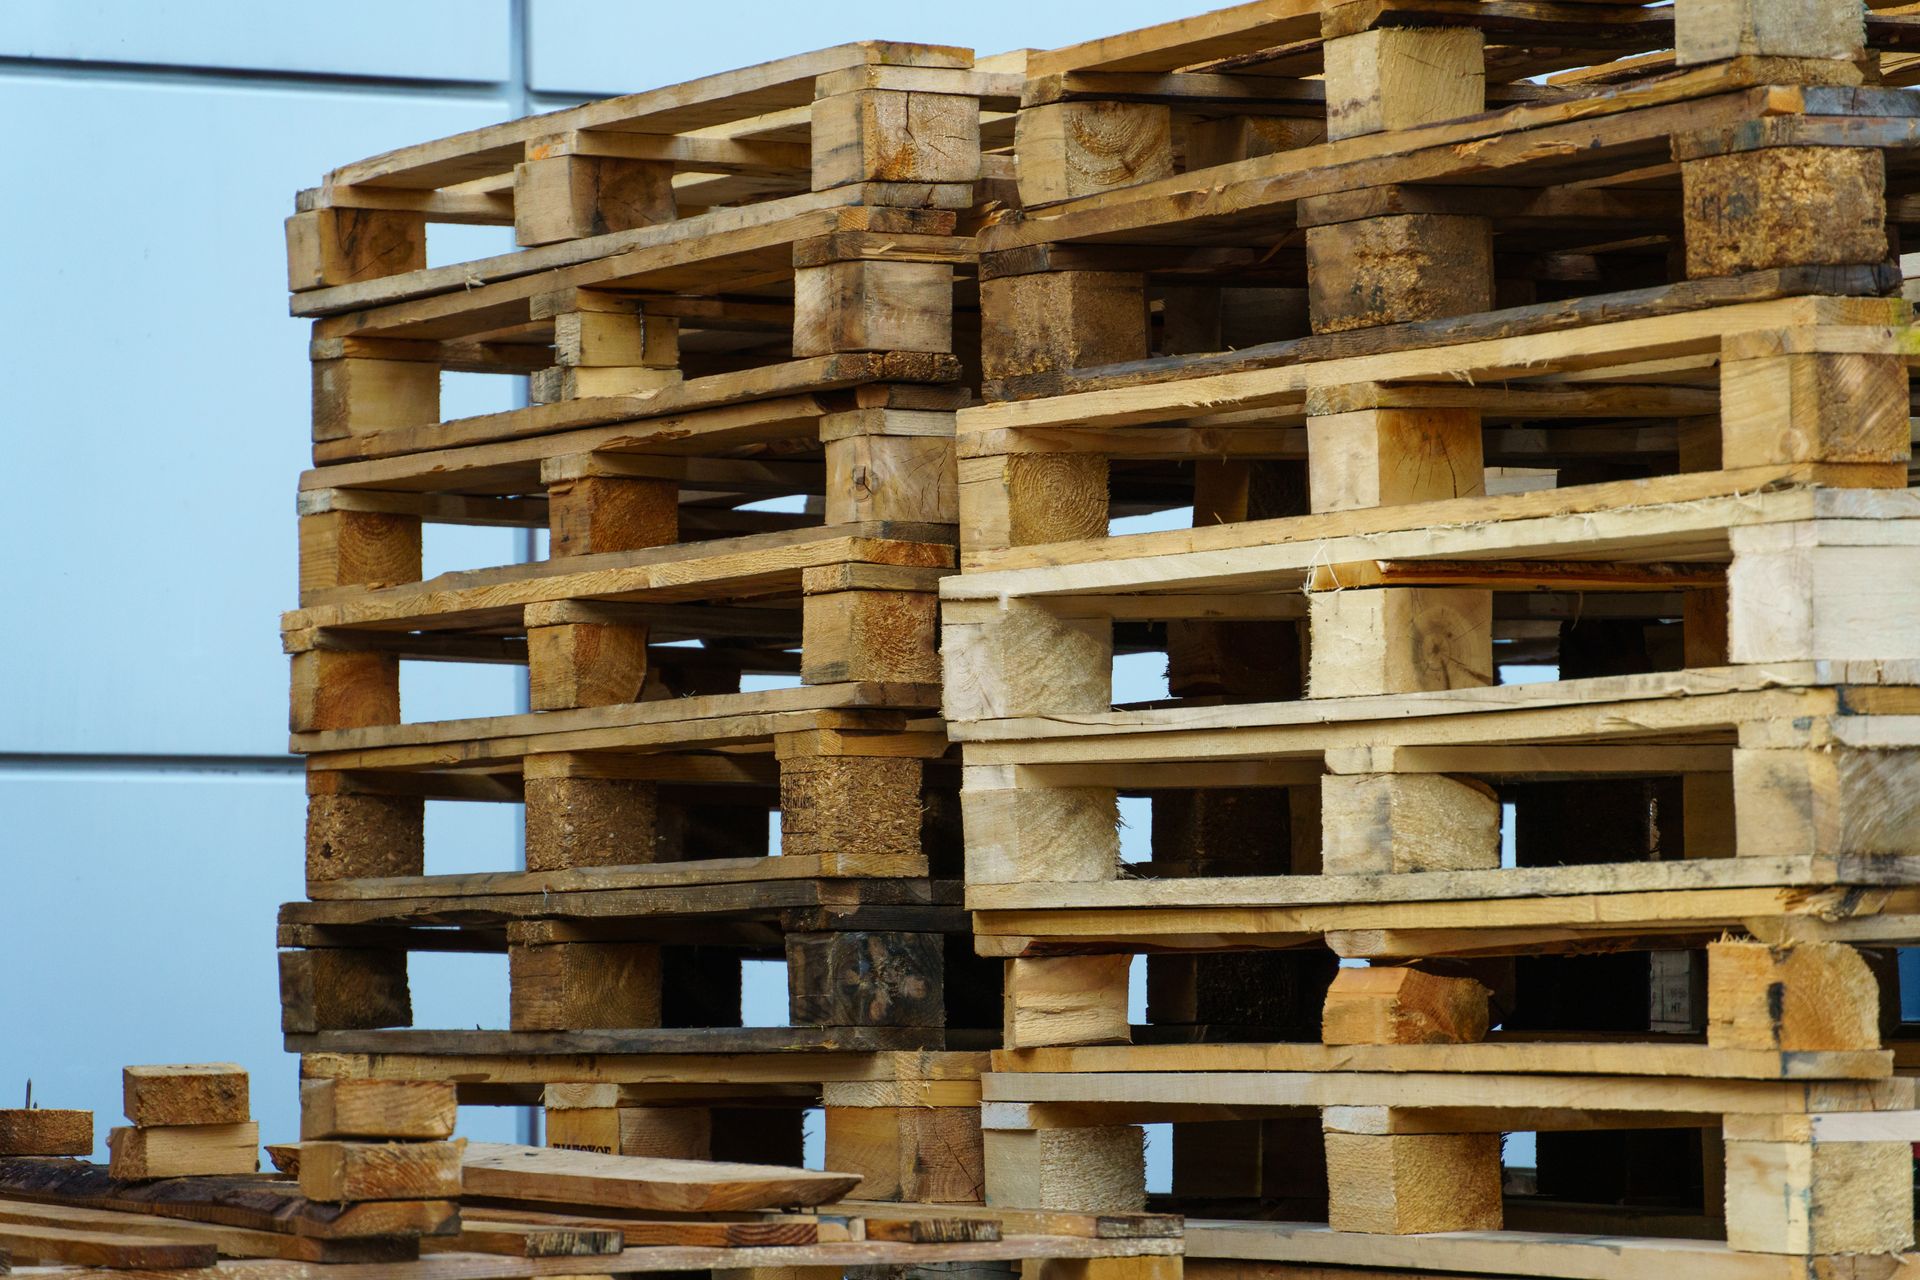 a pile of various wooden pallets stacked on top of each other.